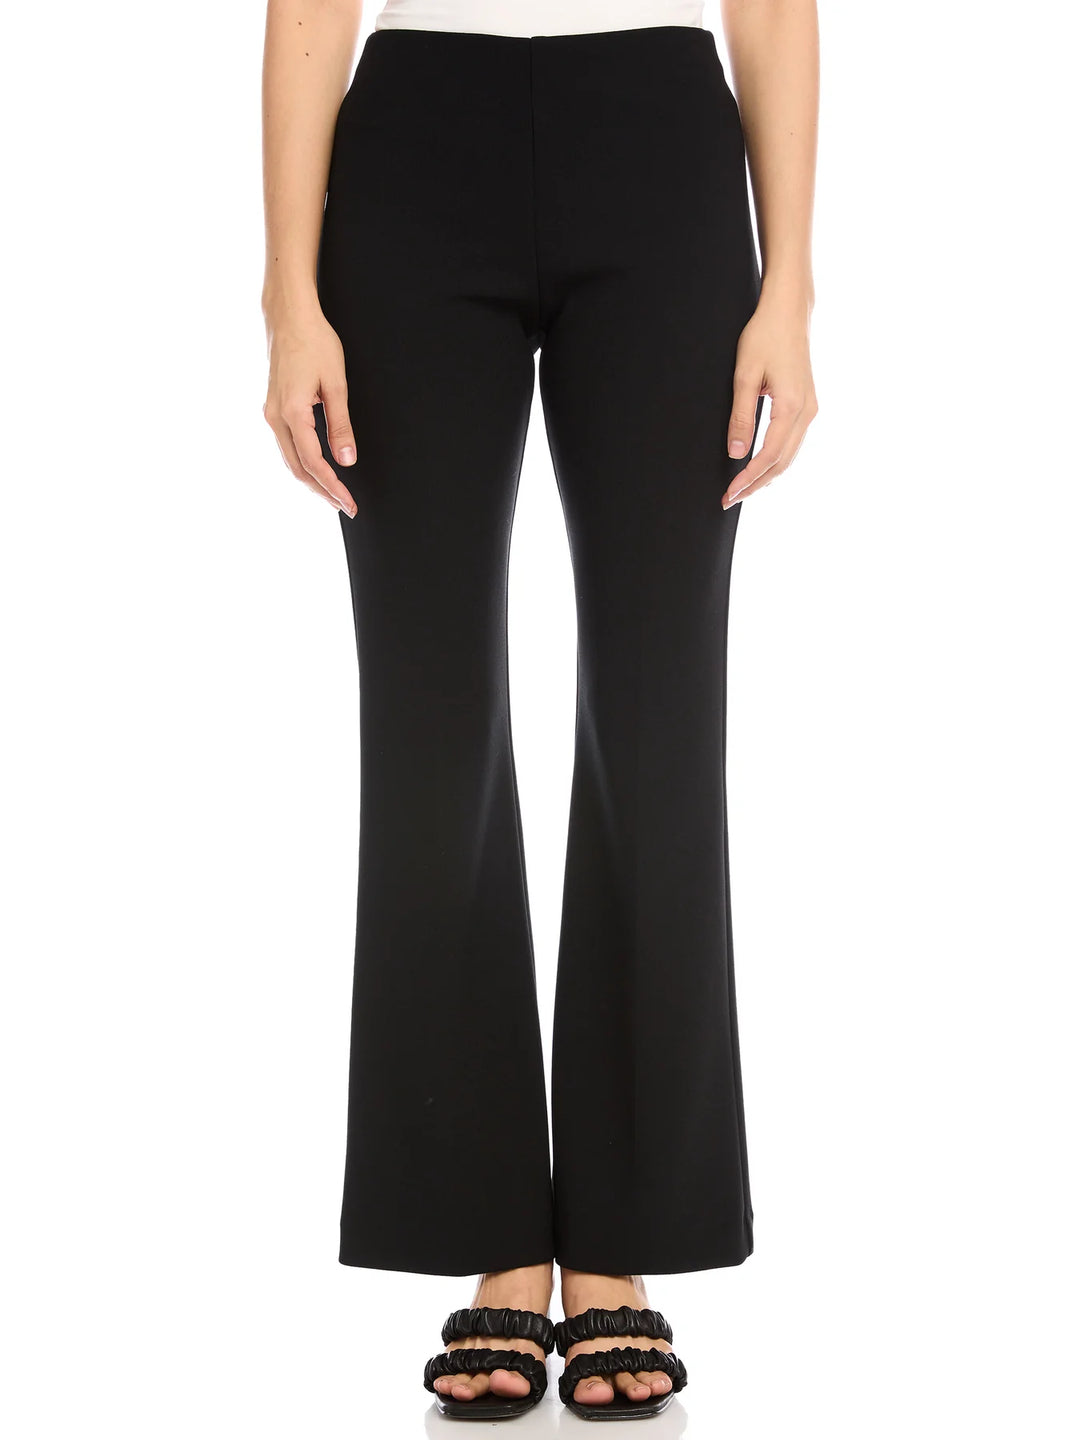 Spanx The Perfect Pant, Kick Flare in Very Black – Sugar & Spice